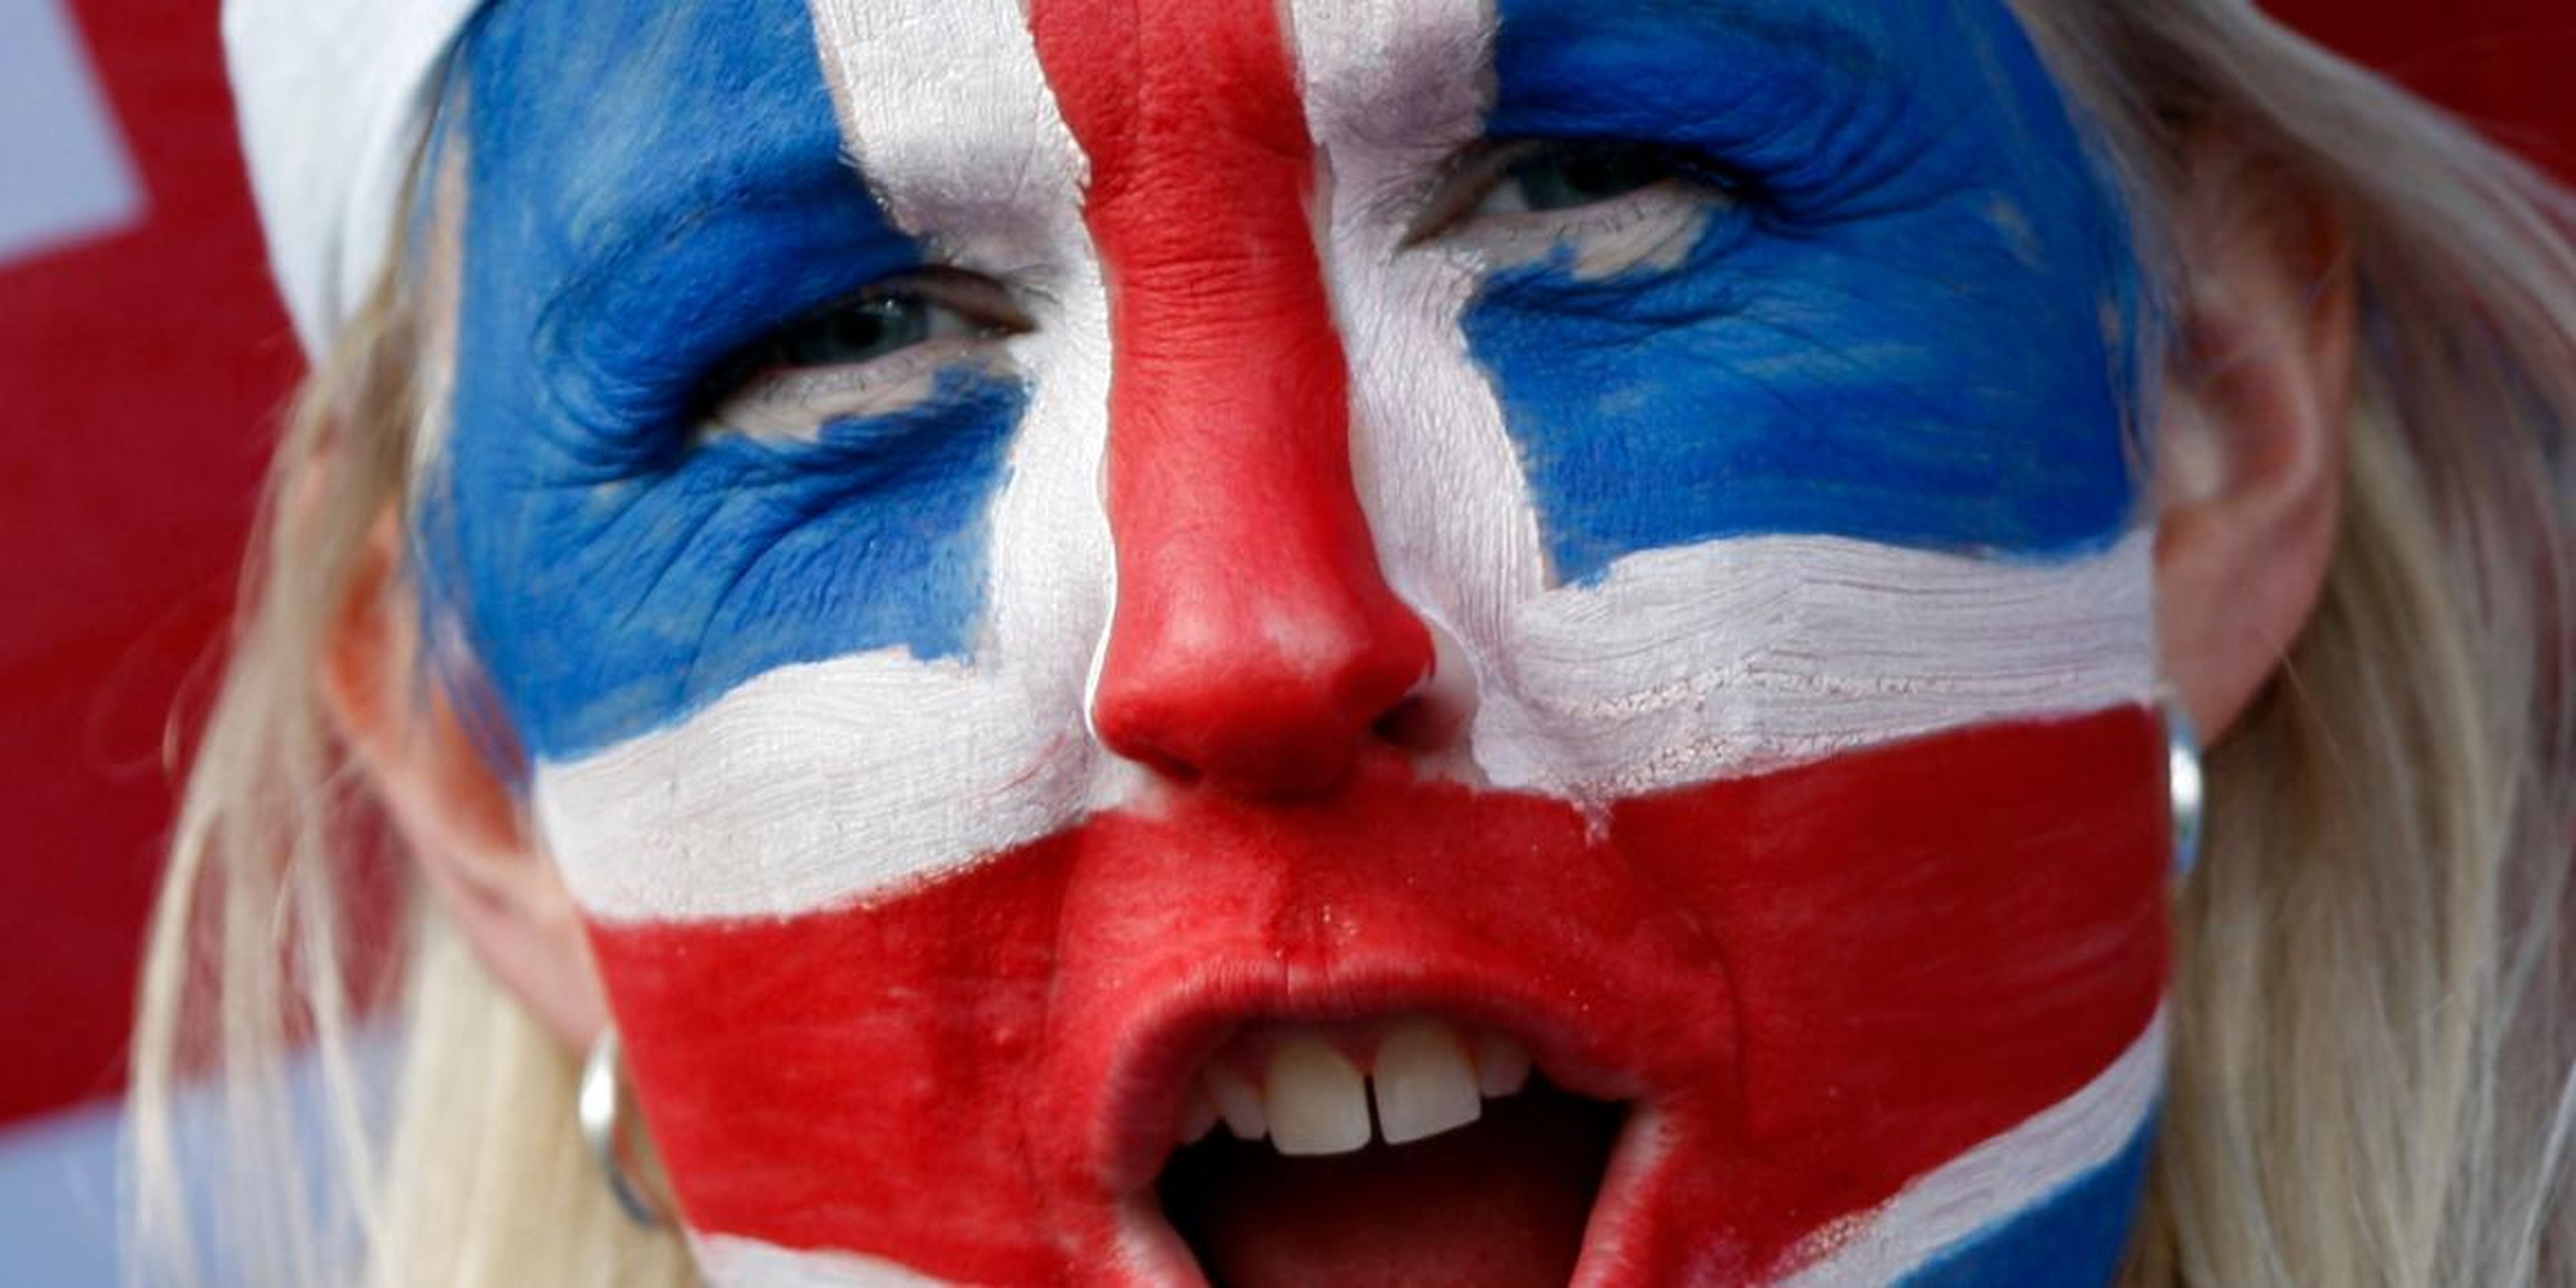 A supporter of Iceland is seen prior to the 1st round Women's Euro 2009 soccer match between Germany and Iceland in Tampere, Finland, Sunday, Aug. 30, 2009. The Women's European soccer championships take place in Finland from Aug. 23 to Sept. 10, 2009.